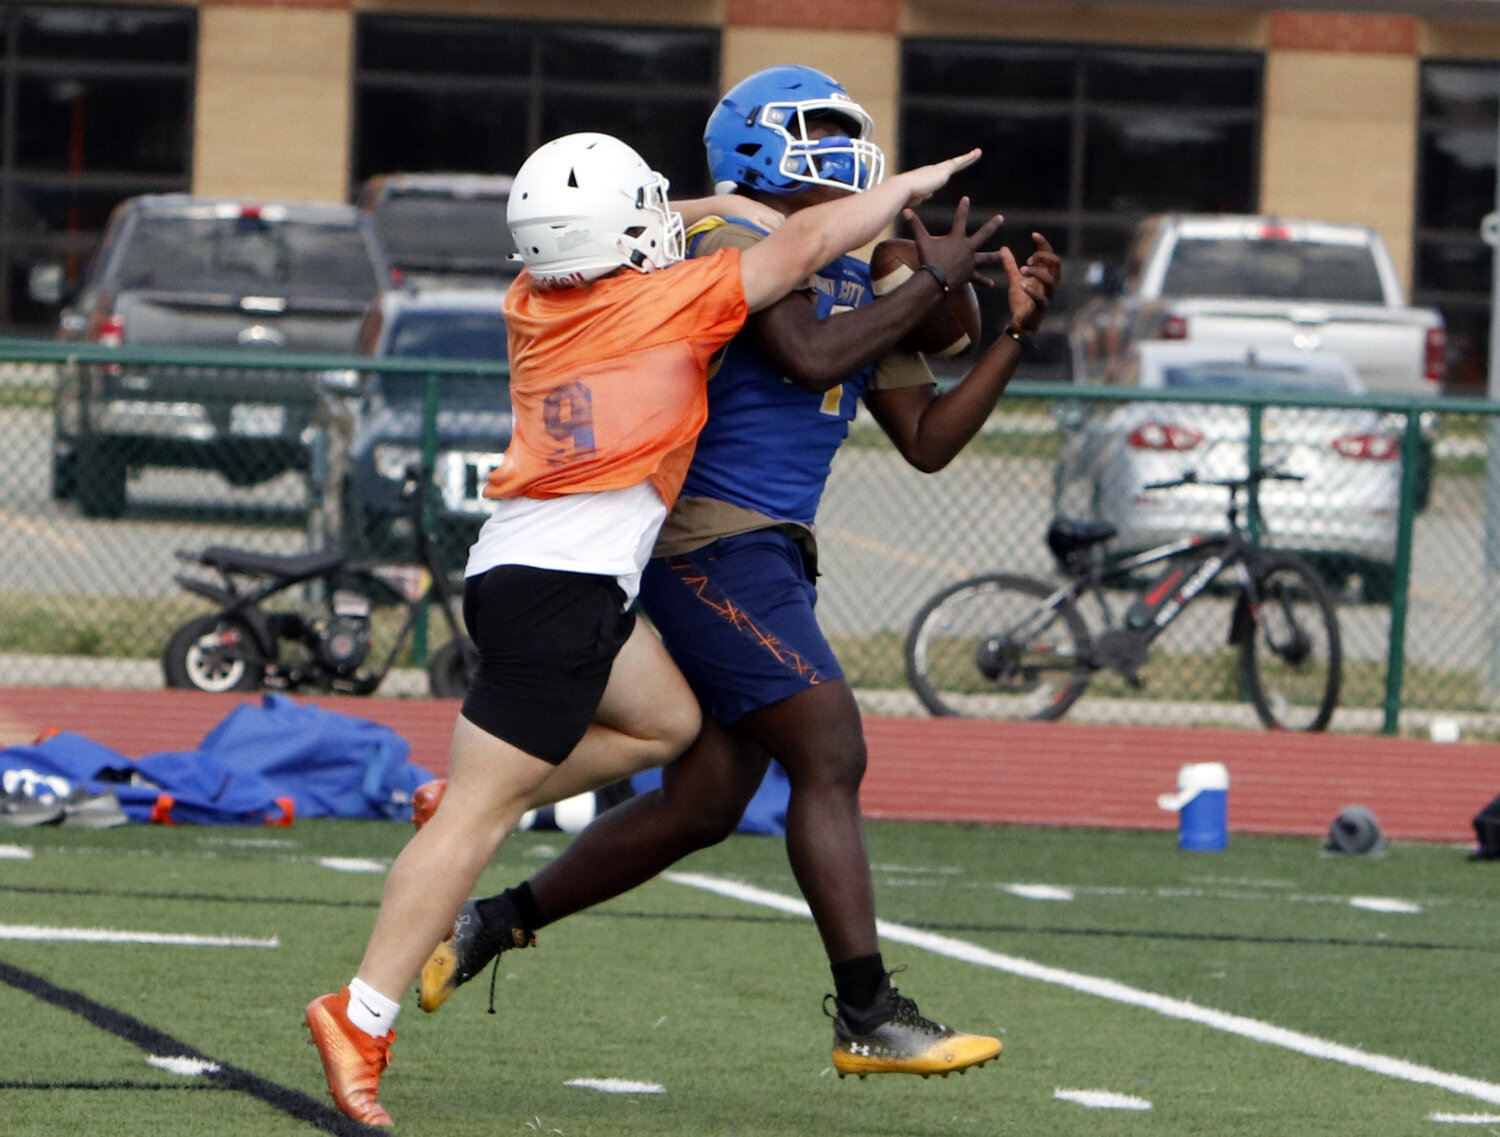 Carle’on Jones makes a contested catch during last week’s scrimmage.